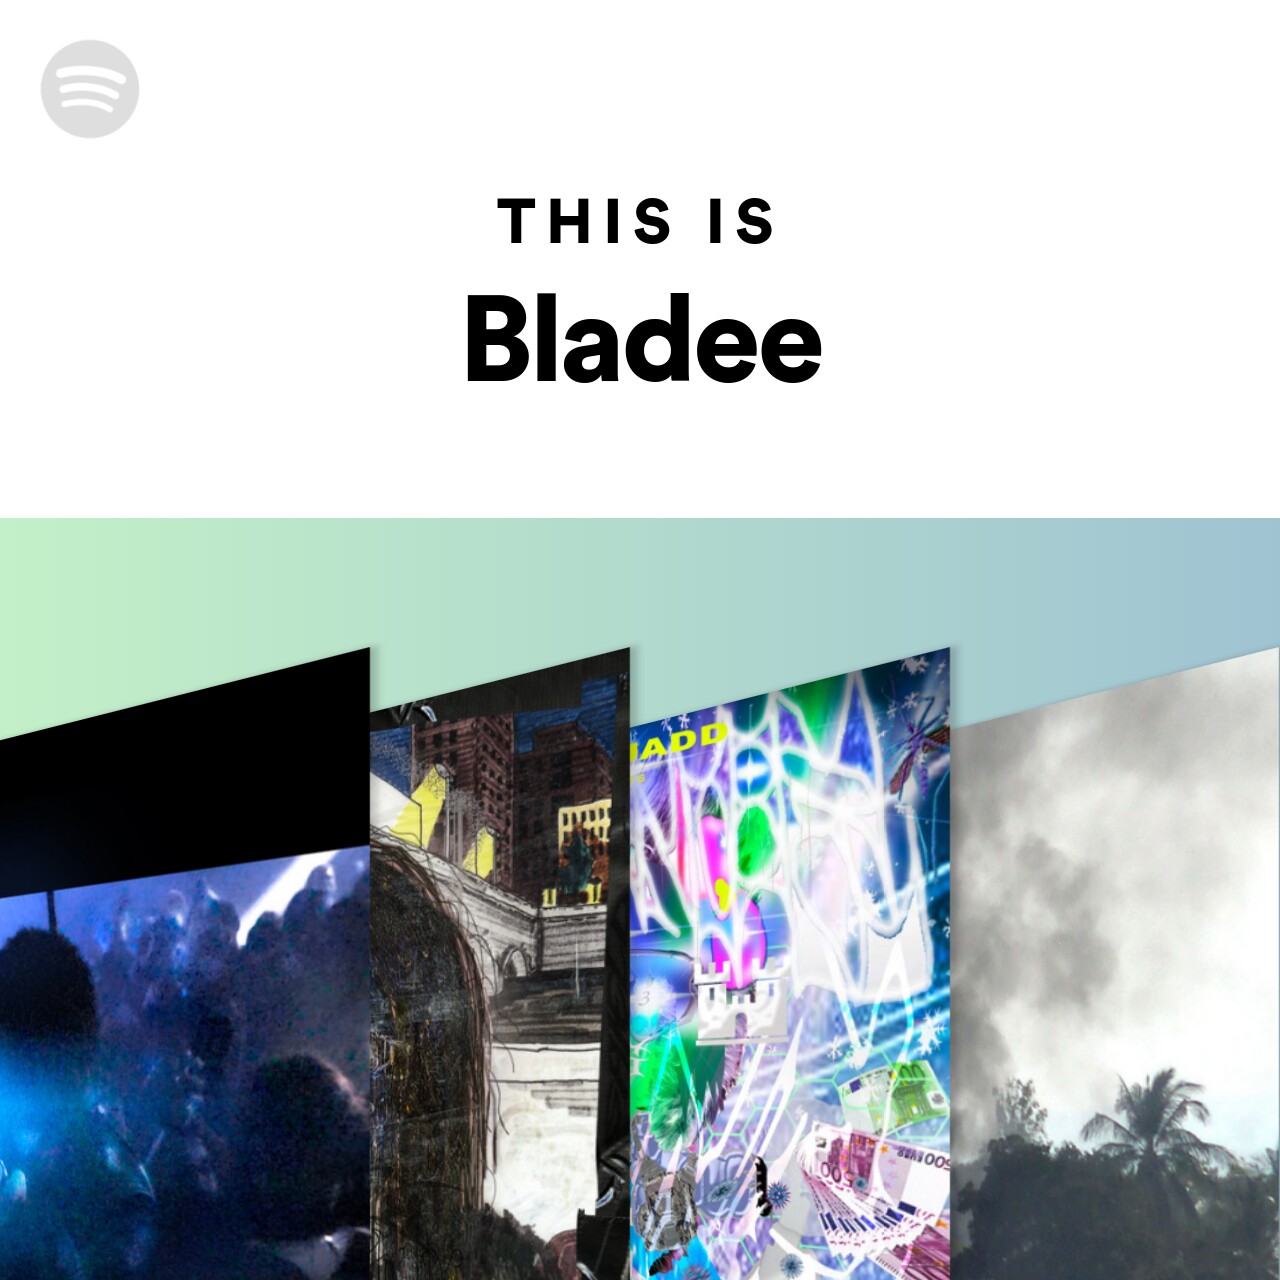 This Is Bladee